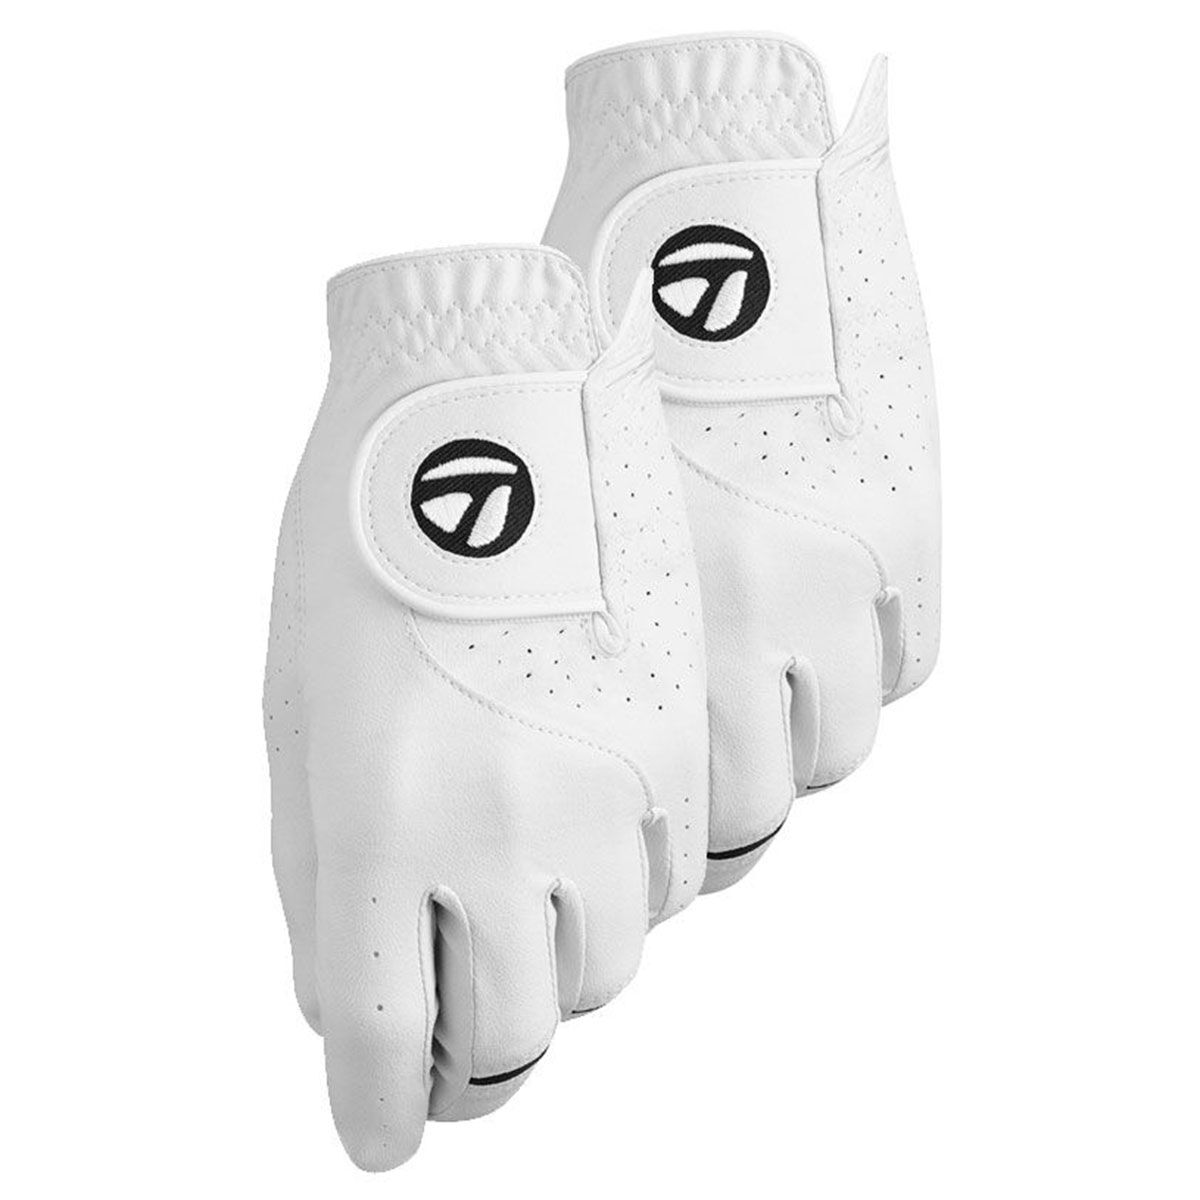 TaylorMade Men’s Stratus Tech Golf Glove - 2 Pack, Mens, Left hand, Small, White | American Golf